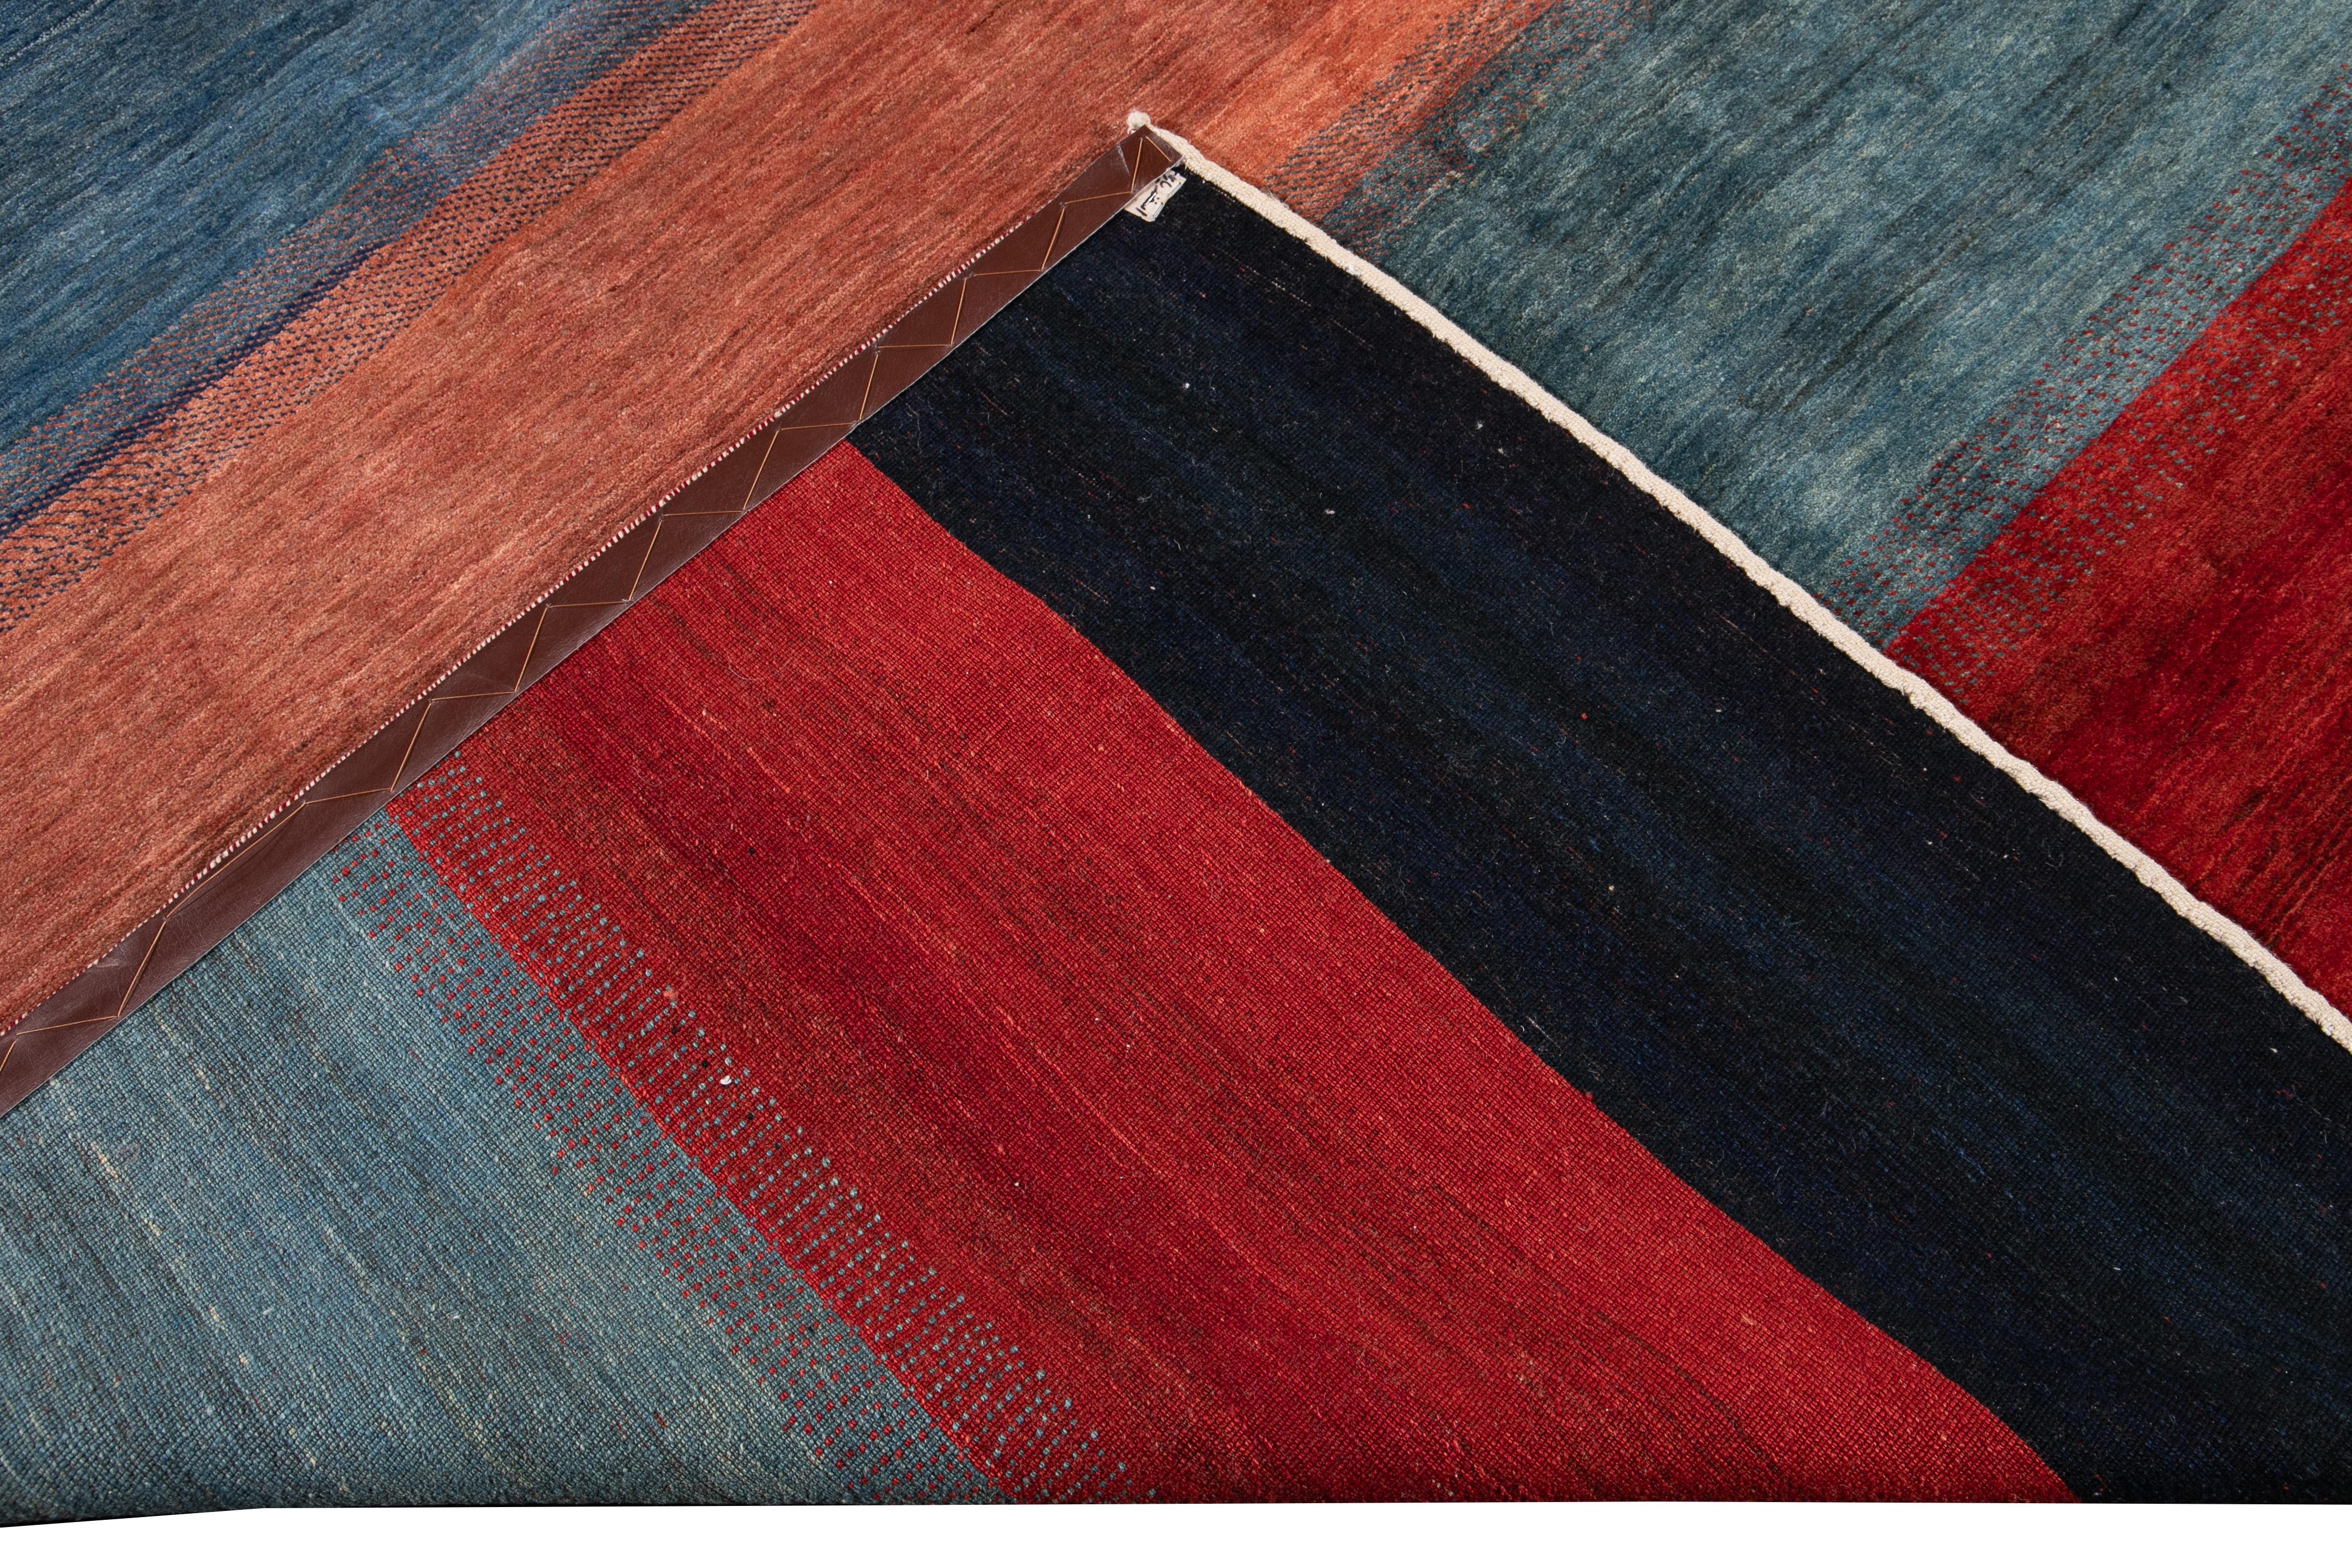 Beautiful contemporary Persian Gabbeh hand knotted wool rug. This Gabbeh rug has a gorgeous striped field with colors of red, blue, yellow, black, and gray all-over the design.

This rug measures: 8'6